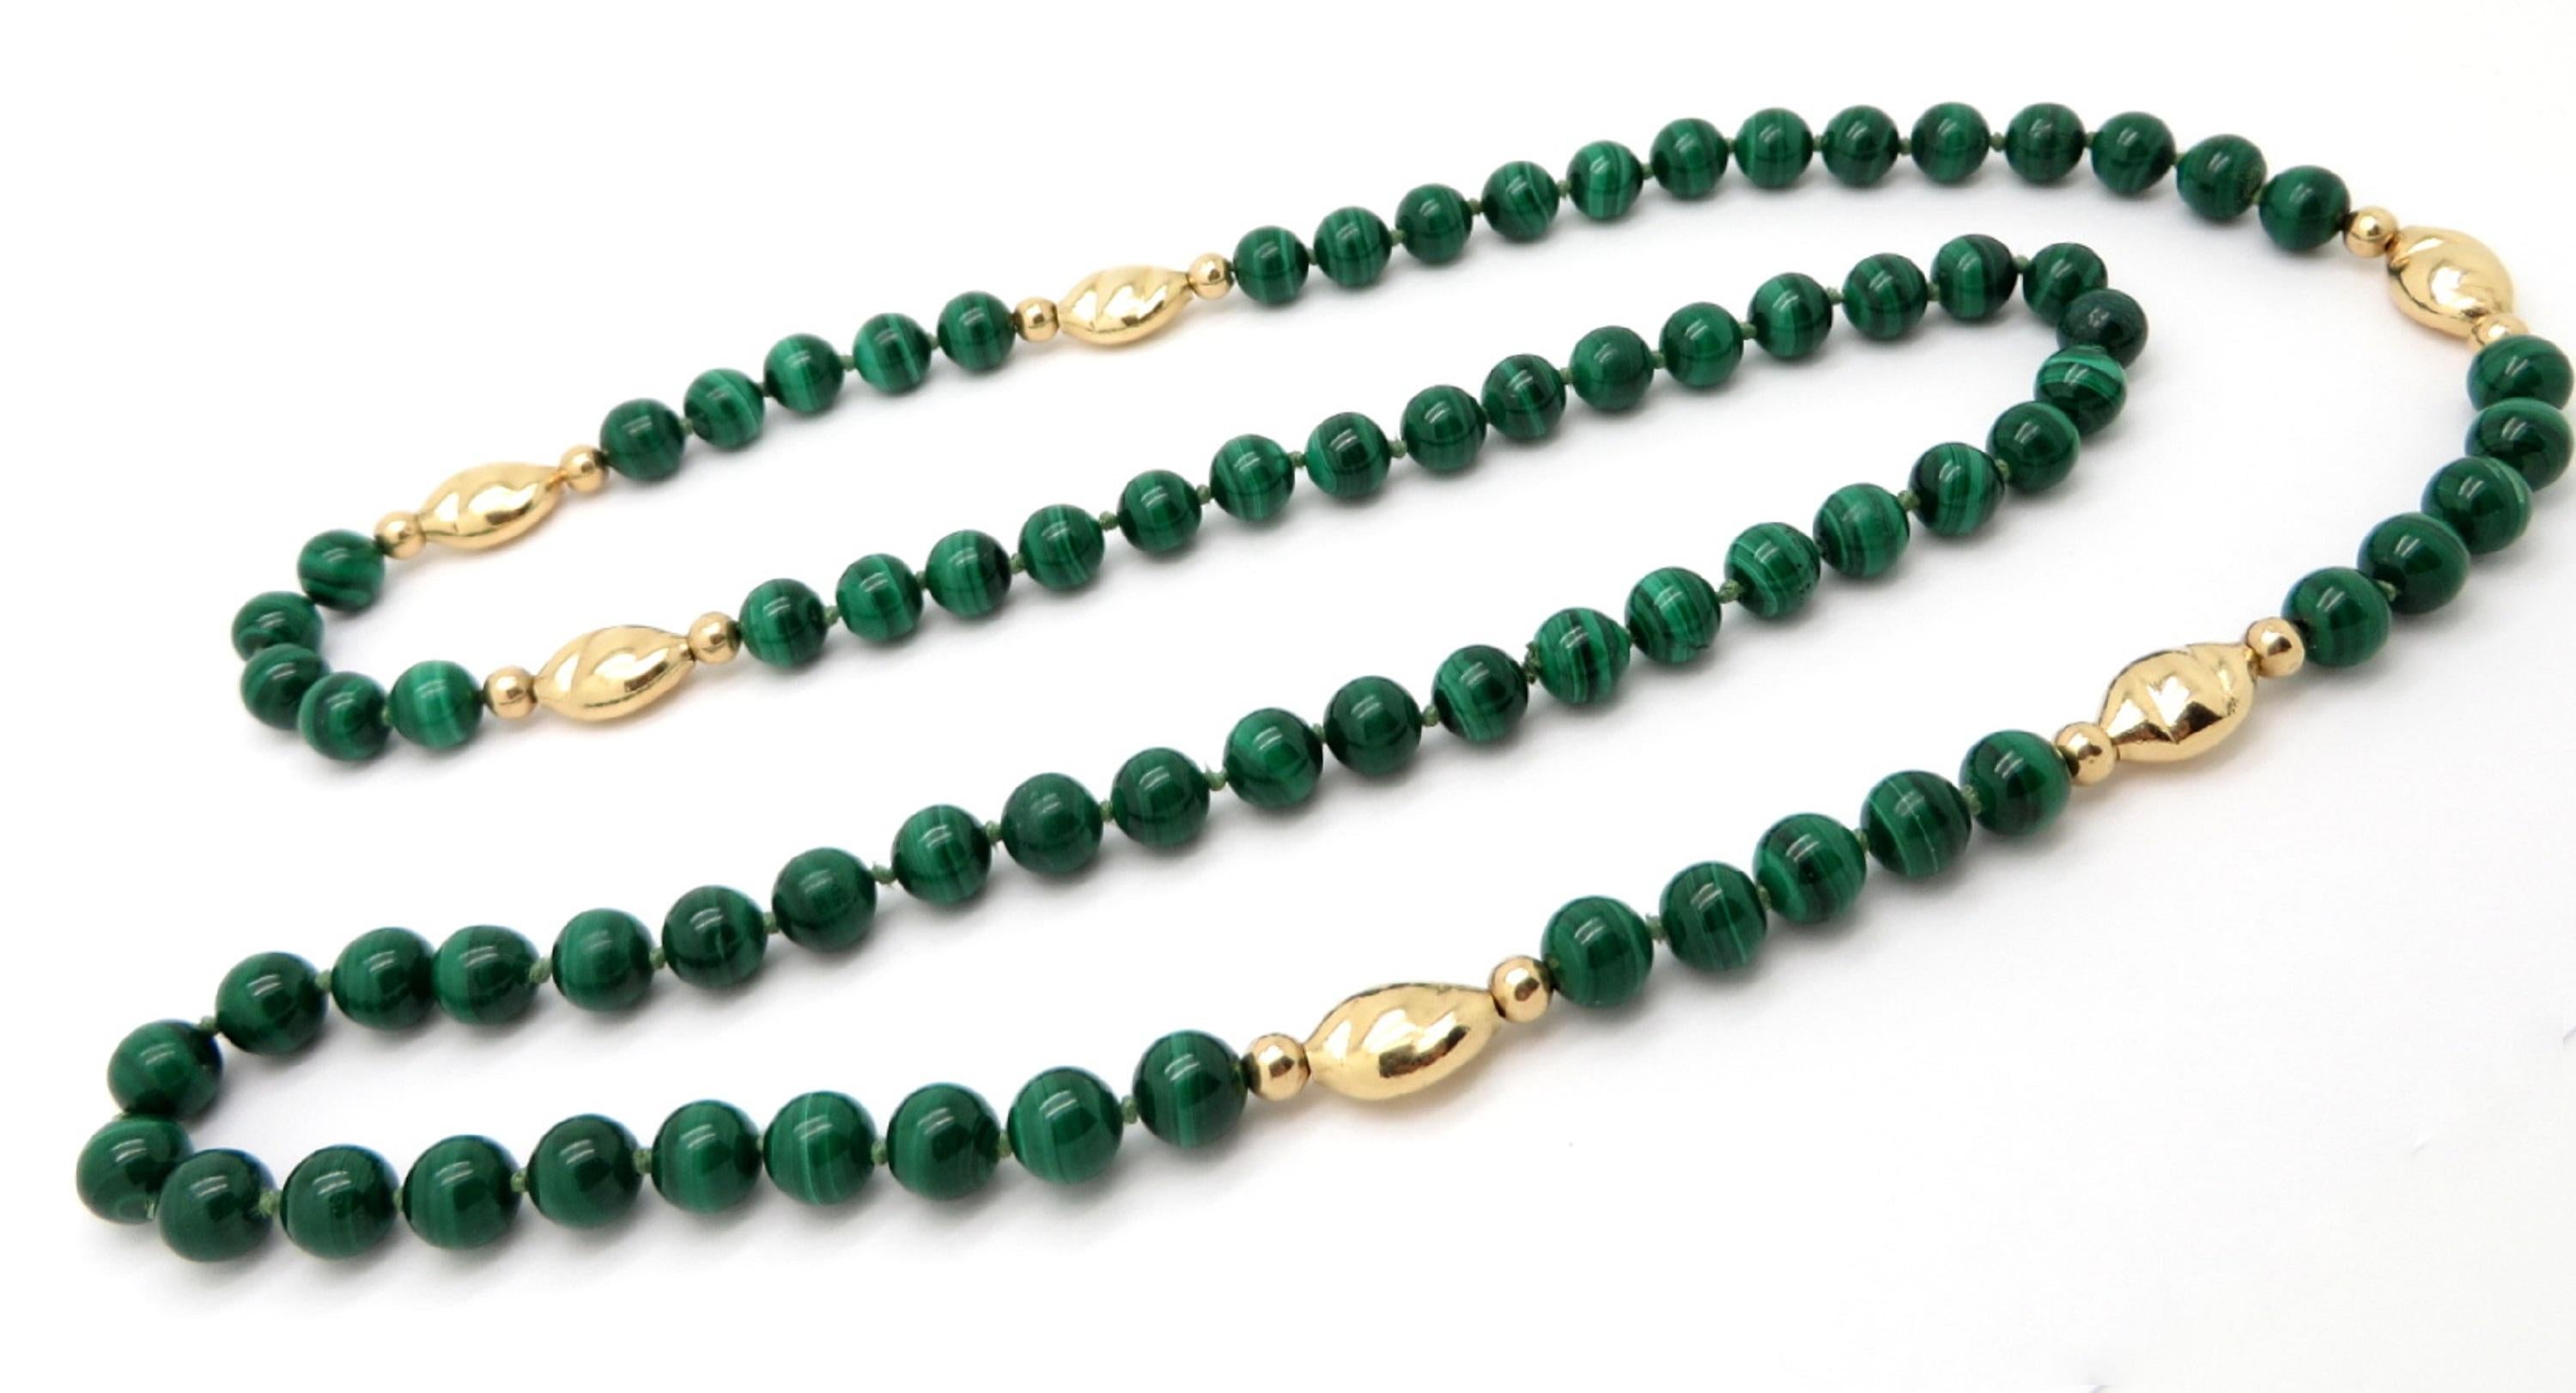 For sale is a beautiful malachite beaded necklace with 14 karat yellow gold decorative beads!
The necklace measures 33” inches long.
Each malachite bead measures 8.10 mm average.
There are 79 malachite beads interspersed with 18K yellow gold beads